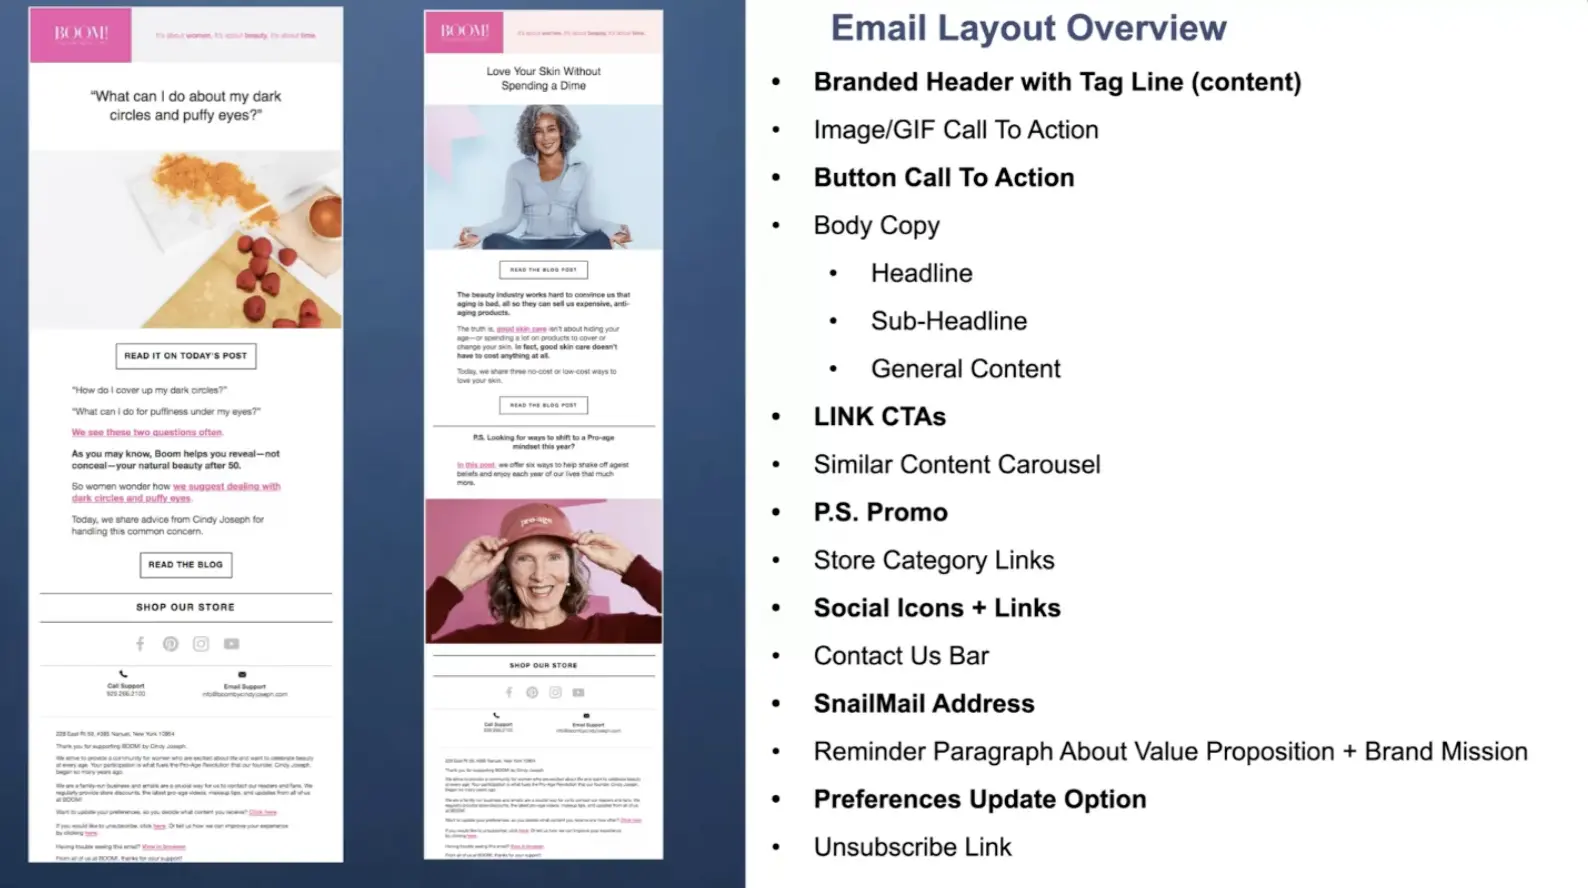 The image shows two different emails, both that follow Ezra Firestone's email layout best practices -- which are also listed on the right of the image. 